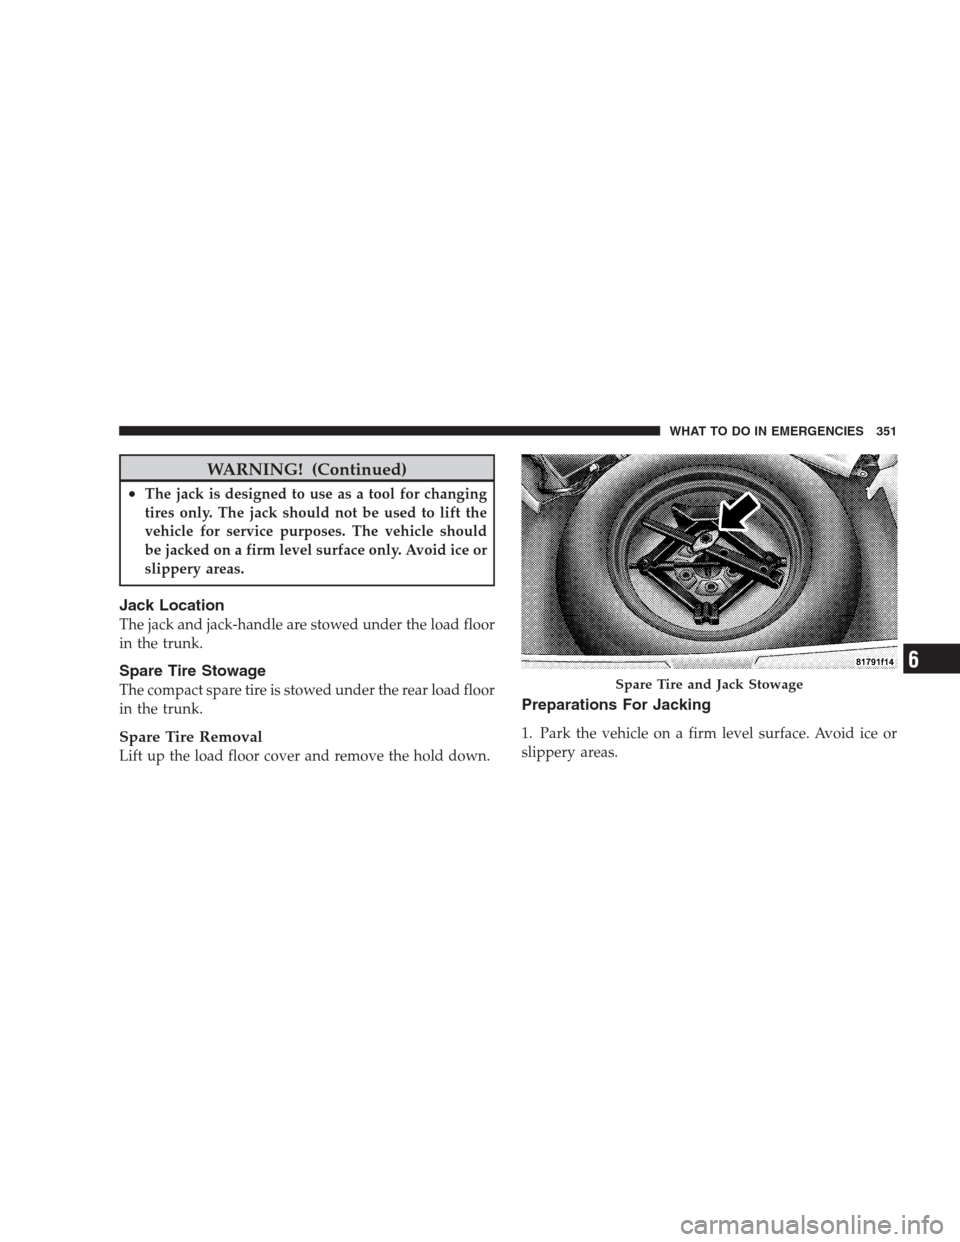 DODGE AVENGER 2009 2.G User Guide WARNING! (Continued)
•The jack is designed to use as a tool for changing
tires only. The jack should not be used to lift the
vehicle for service purposes. The vehicle should
be jacked on a firm leve